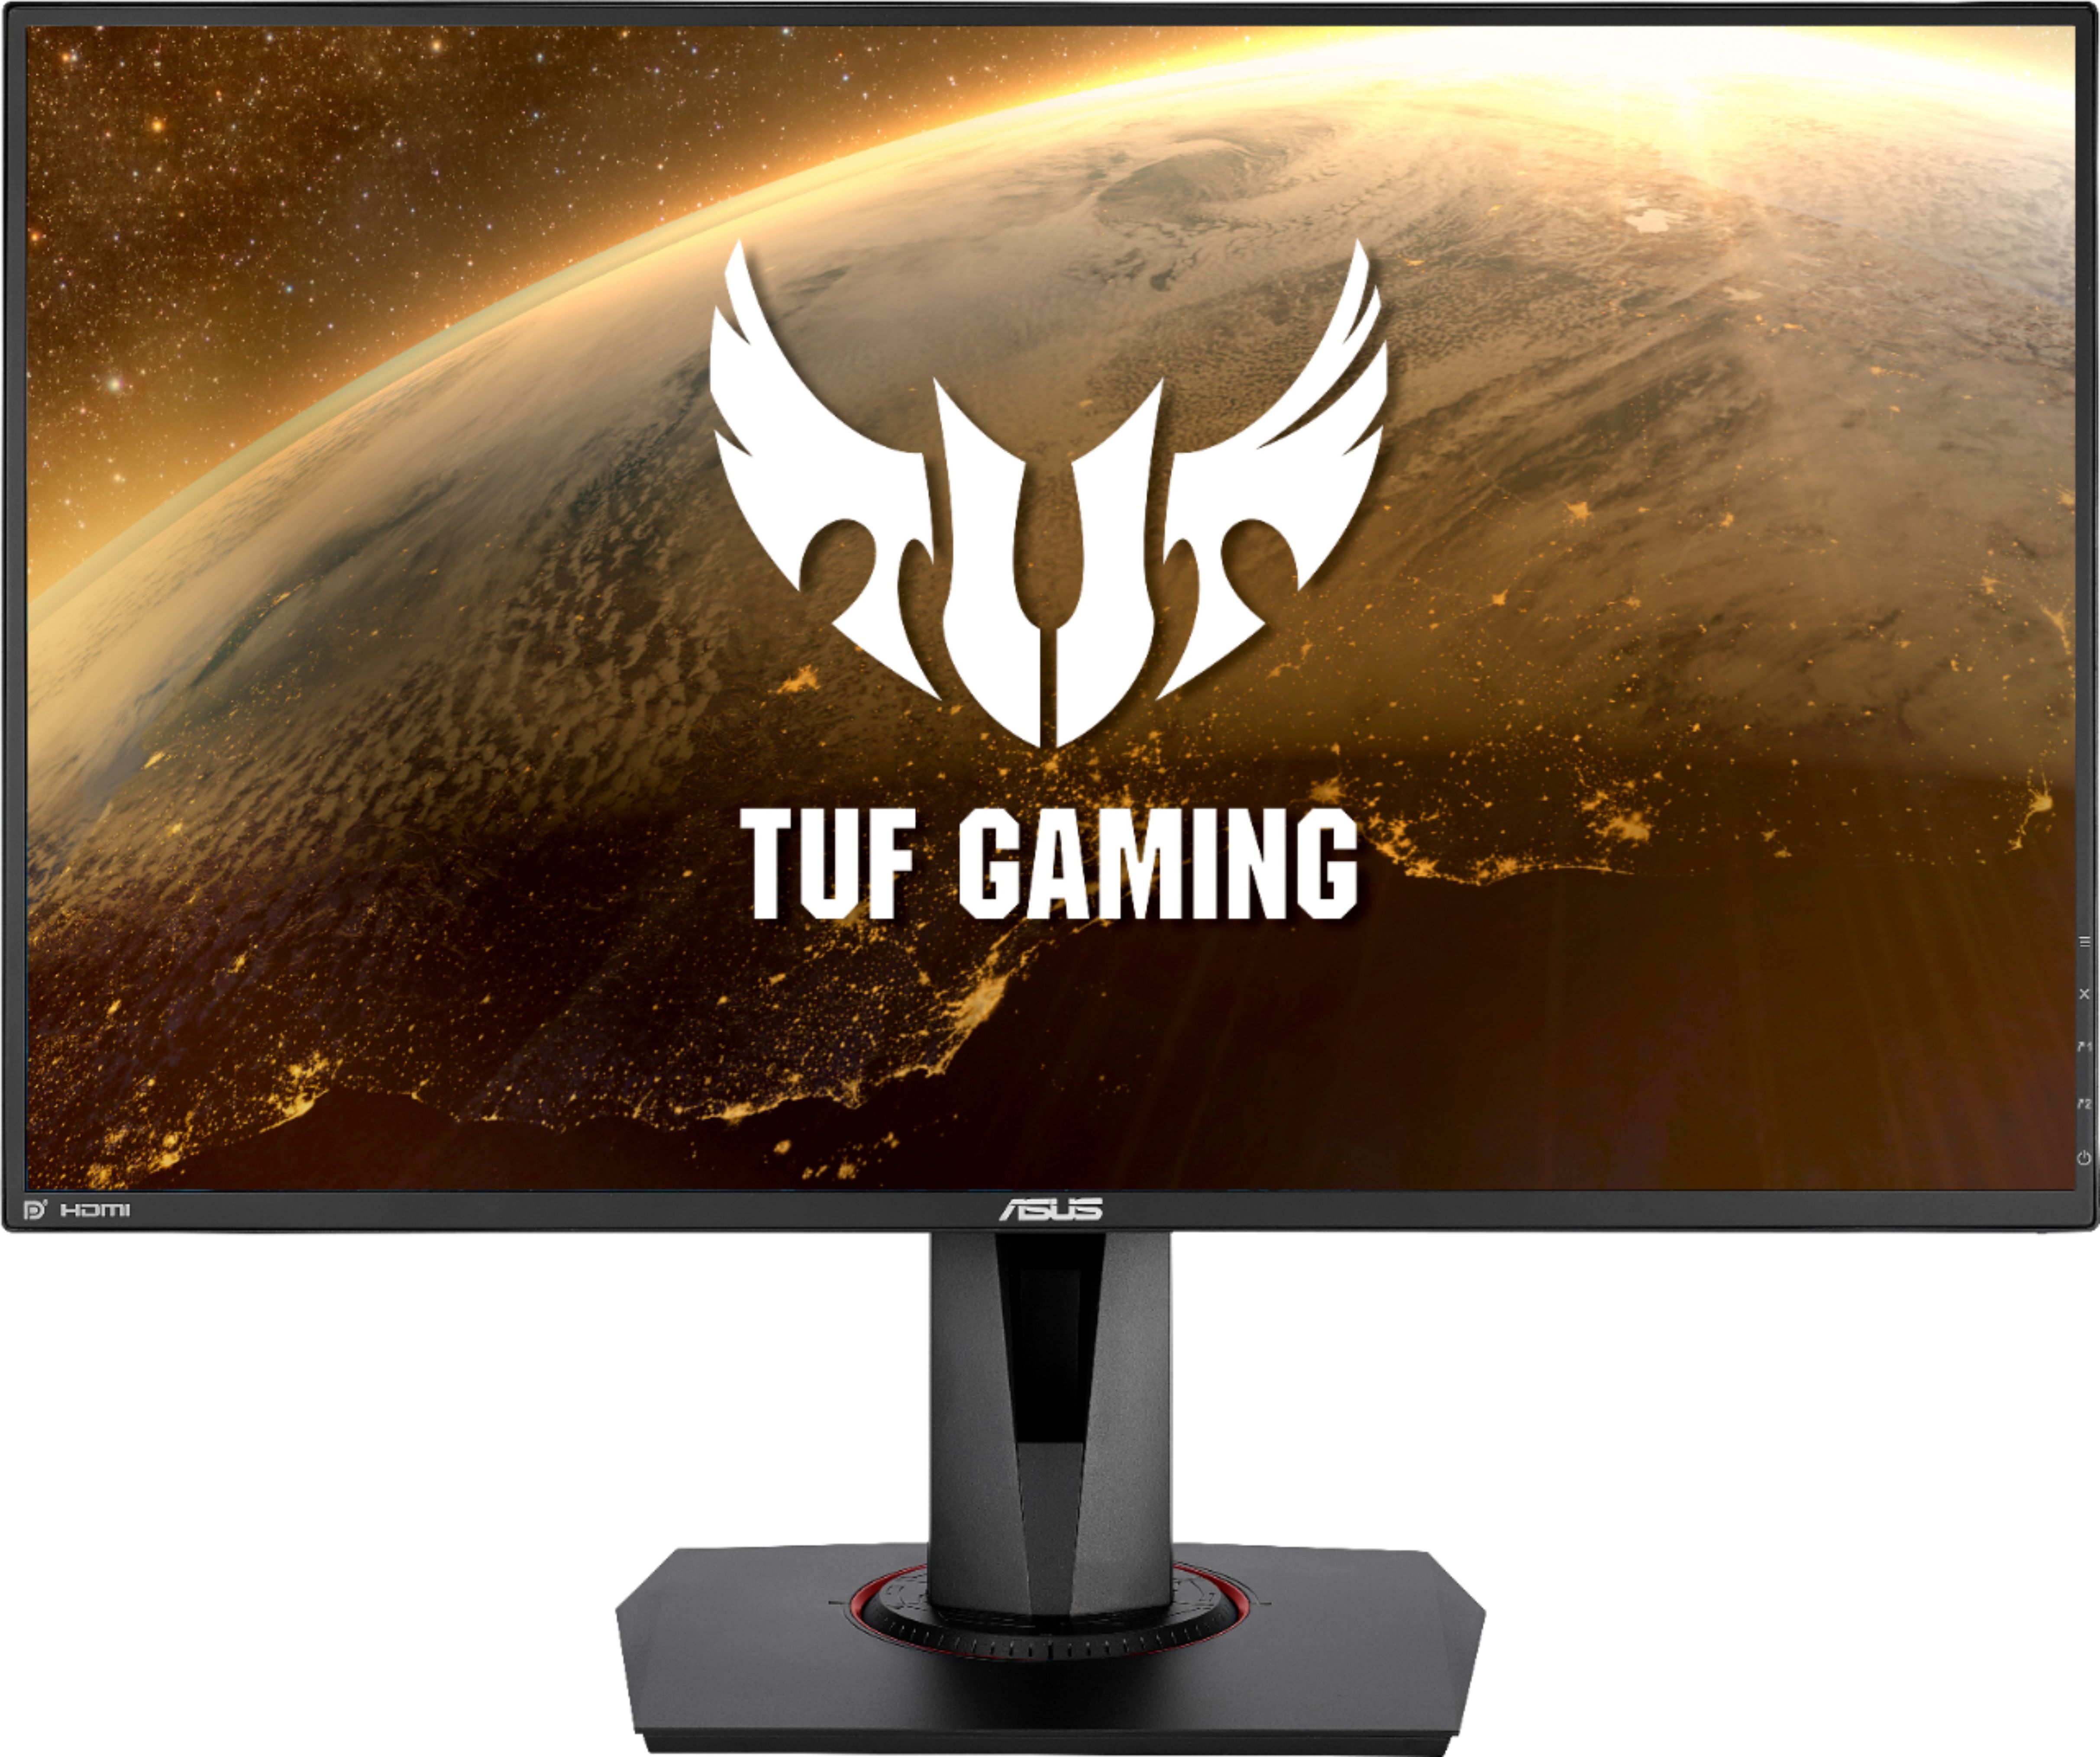 ASUS TUF 27” IPS LED G-SYNC Gaming Monitor with HDR400 (DisplayPort,HDMI) VG279QMY - Best Buy